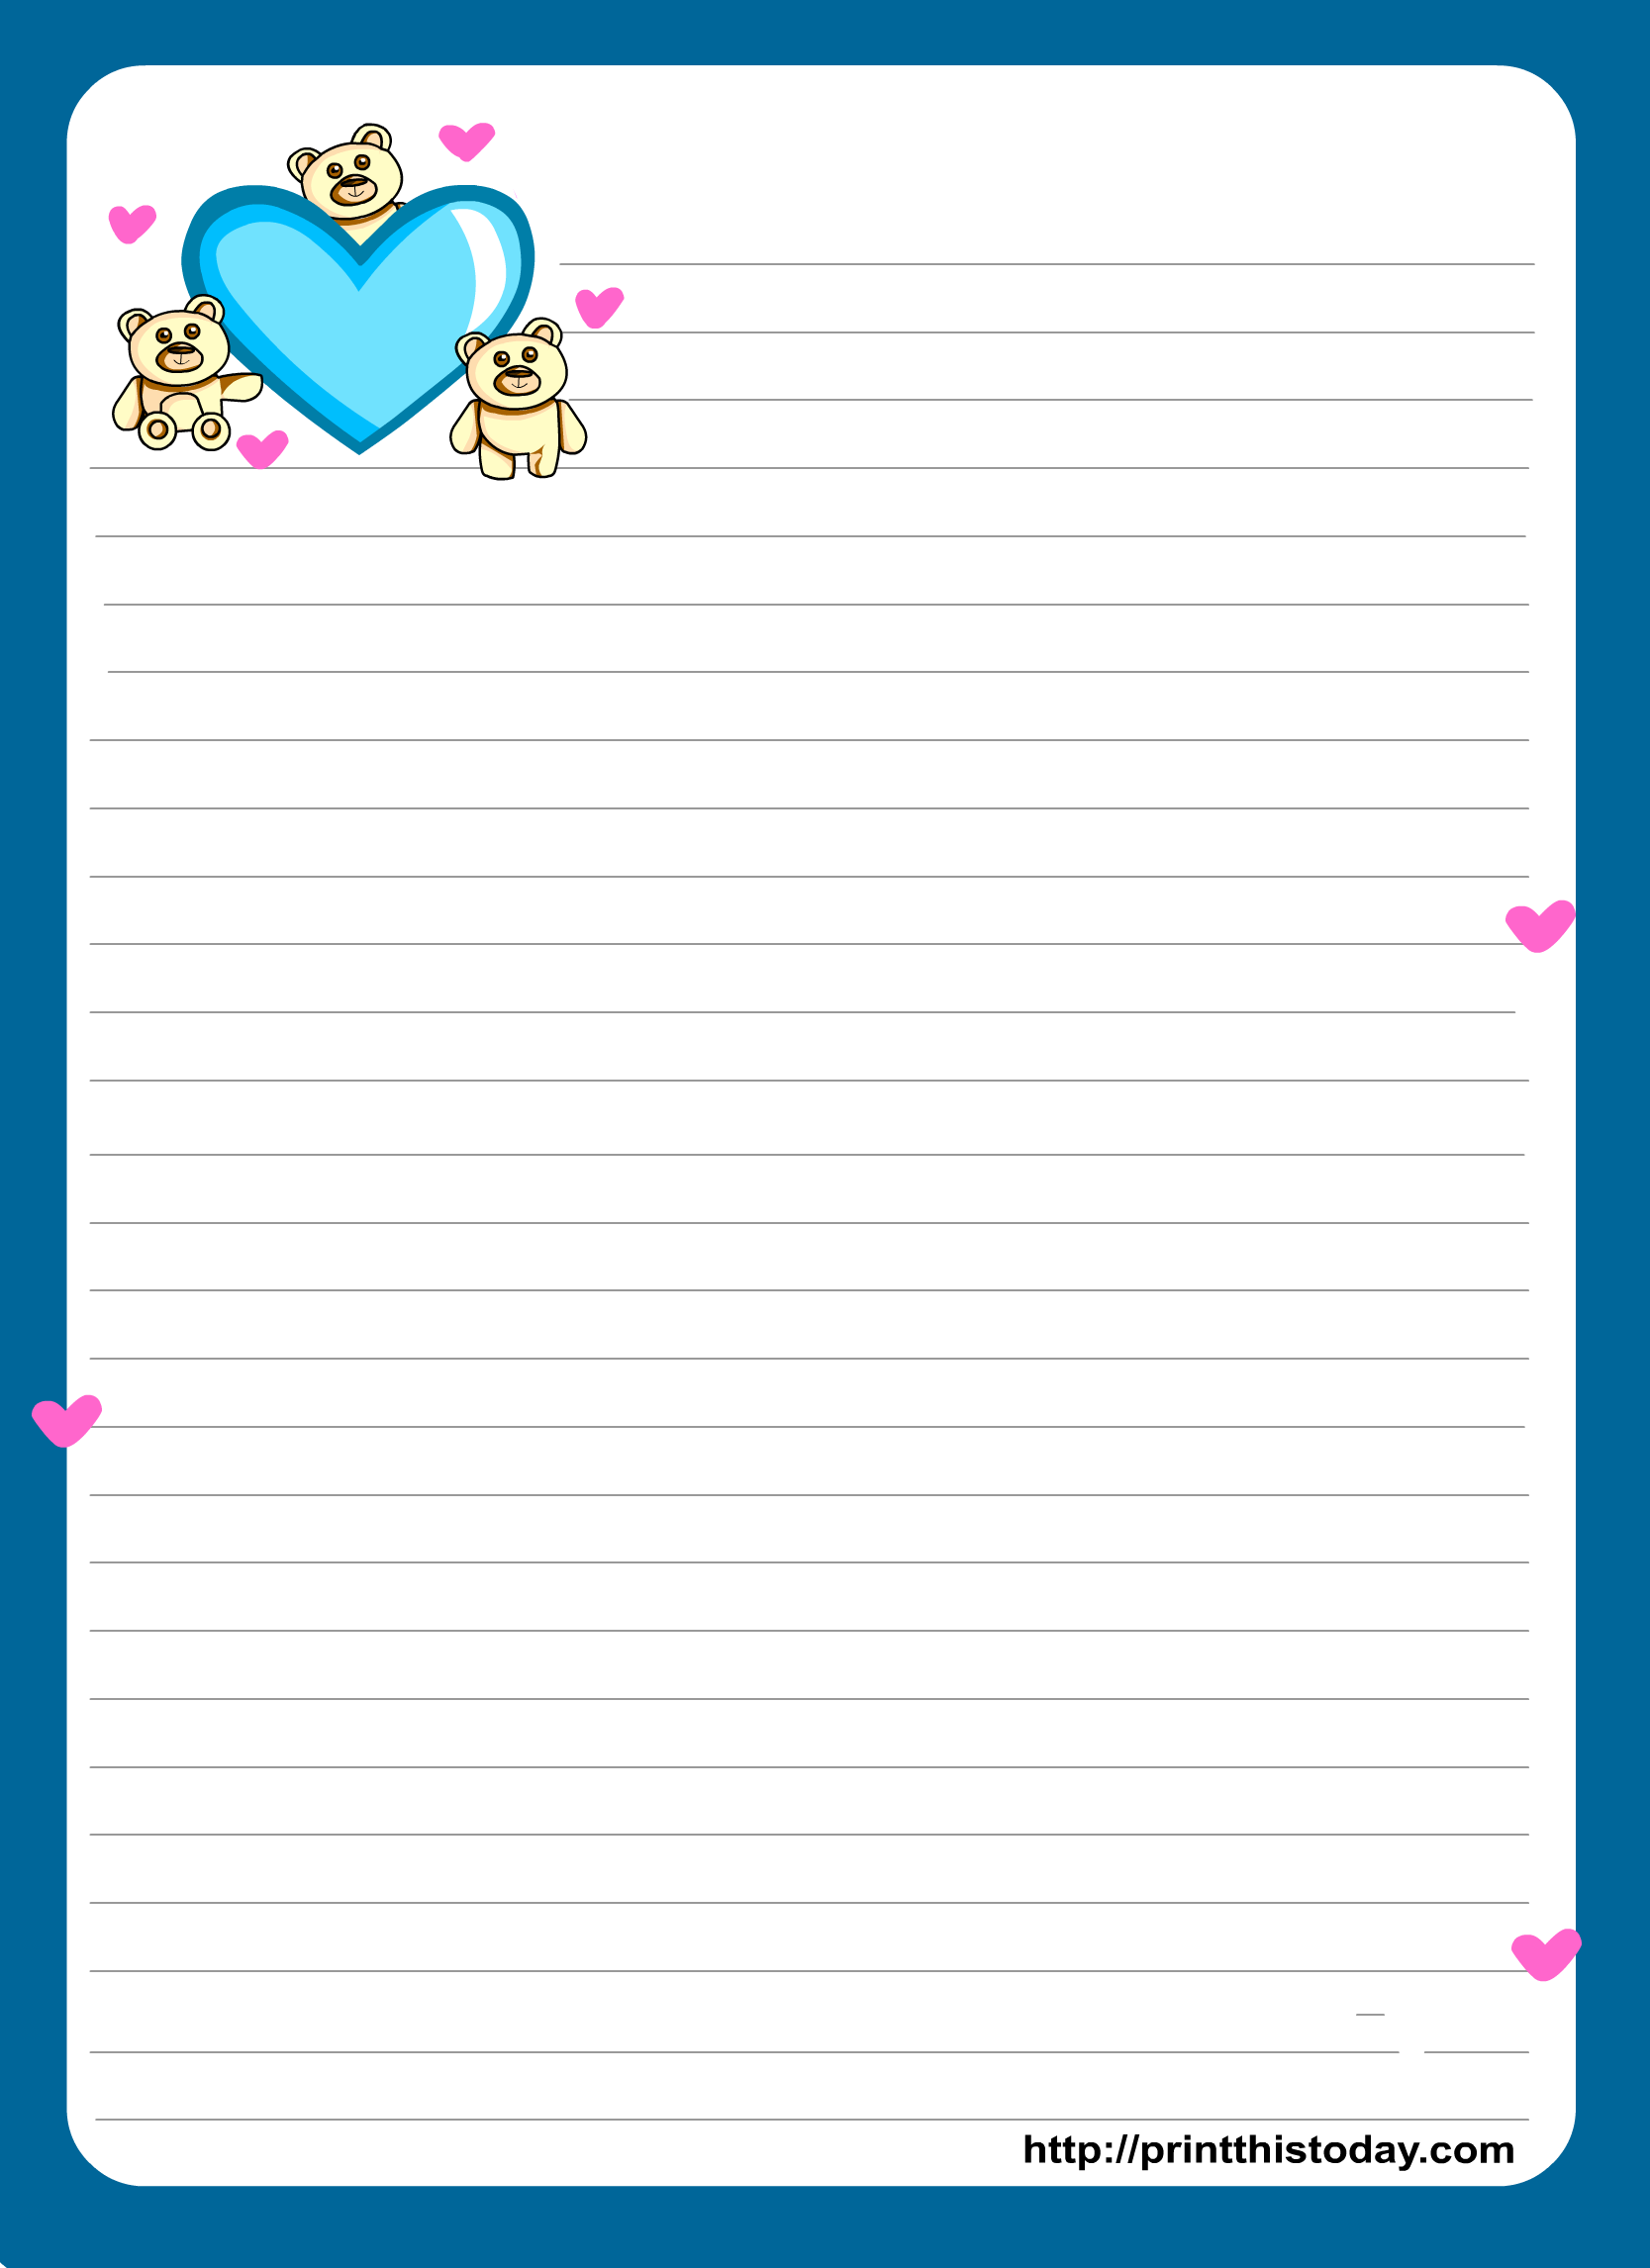 free-printable-love-letter-pad-stationery